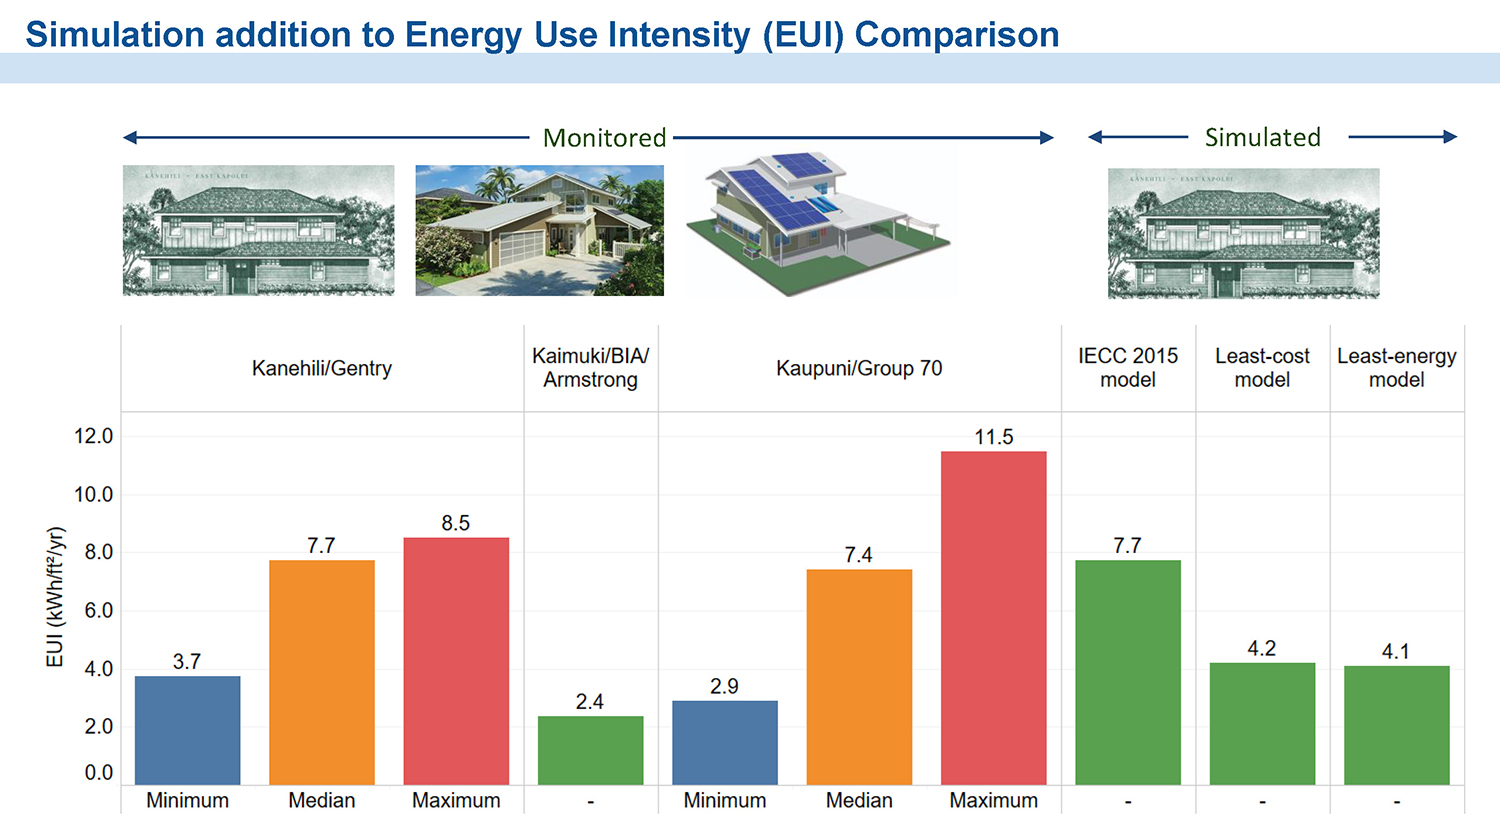 colorful comparison bar graph showing simulation addition to energy use intensity